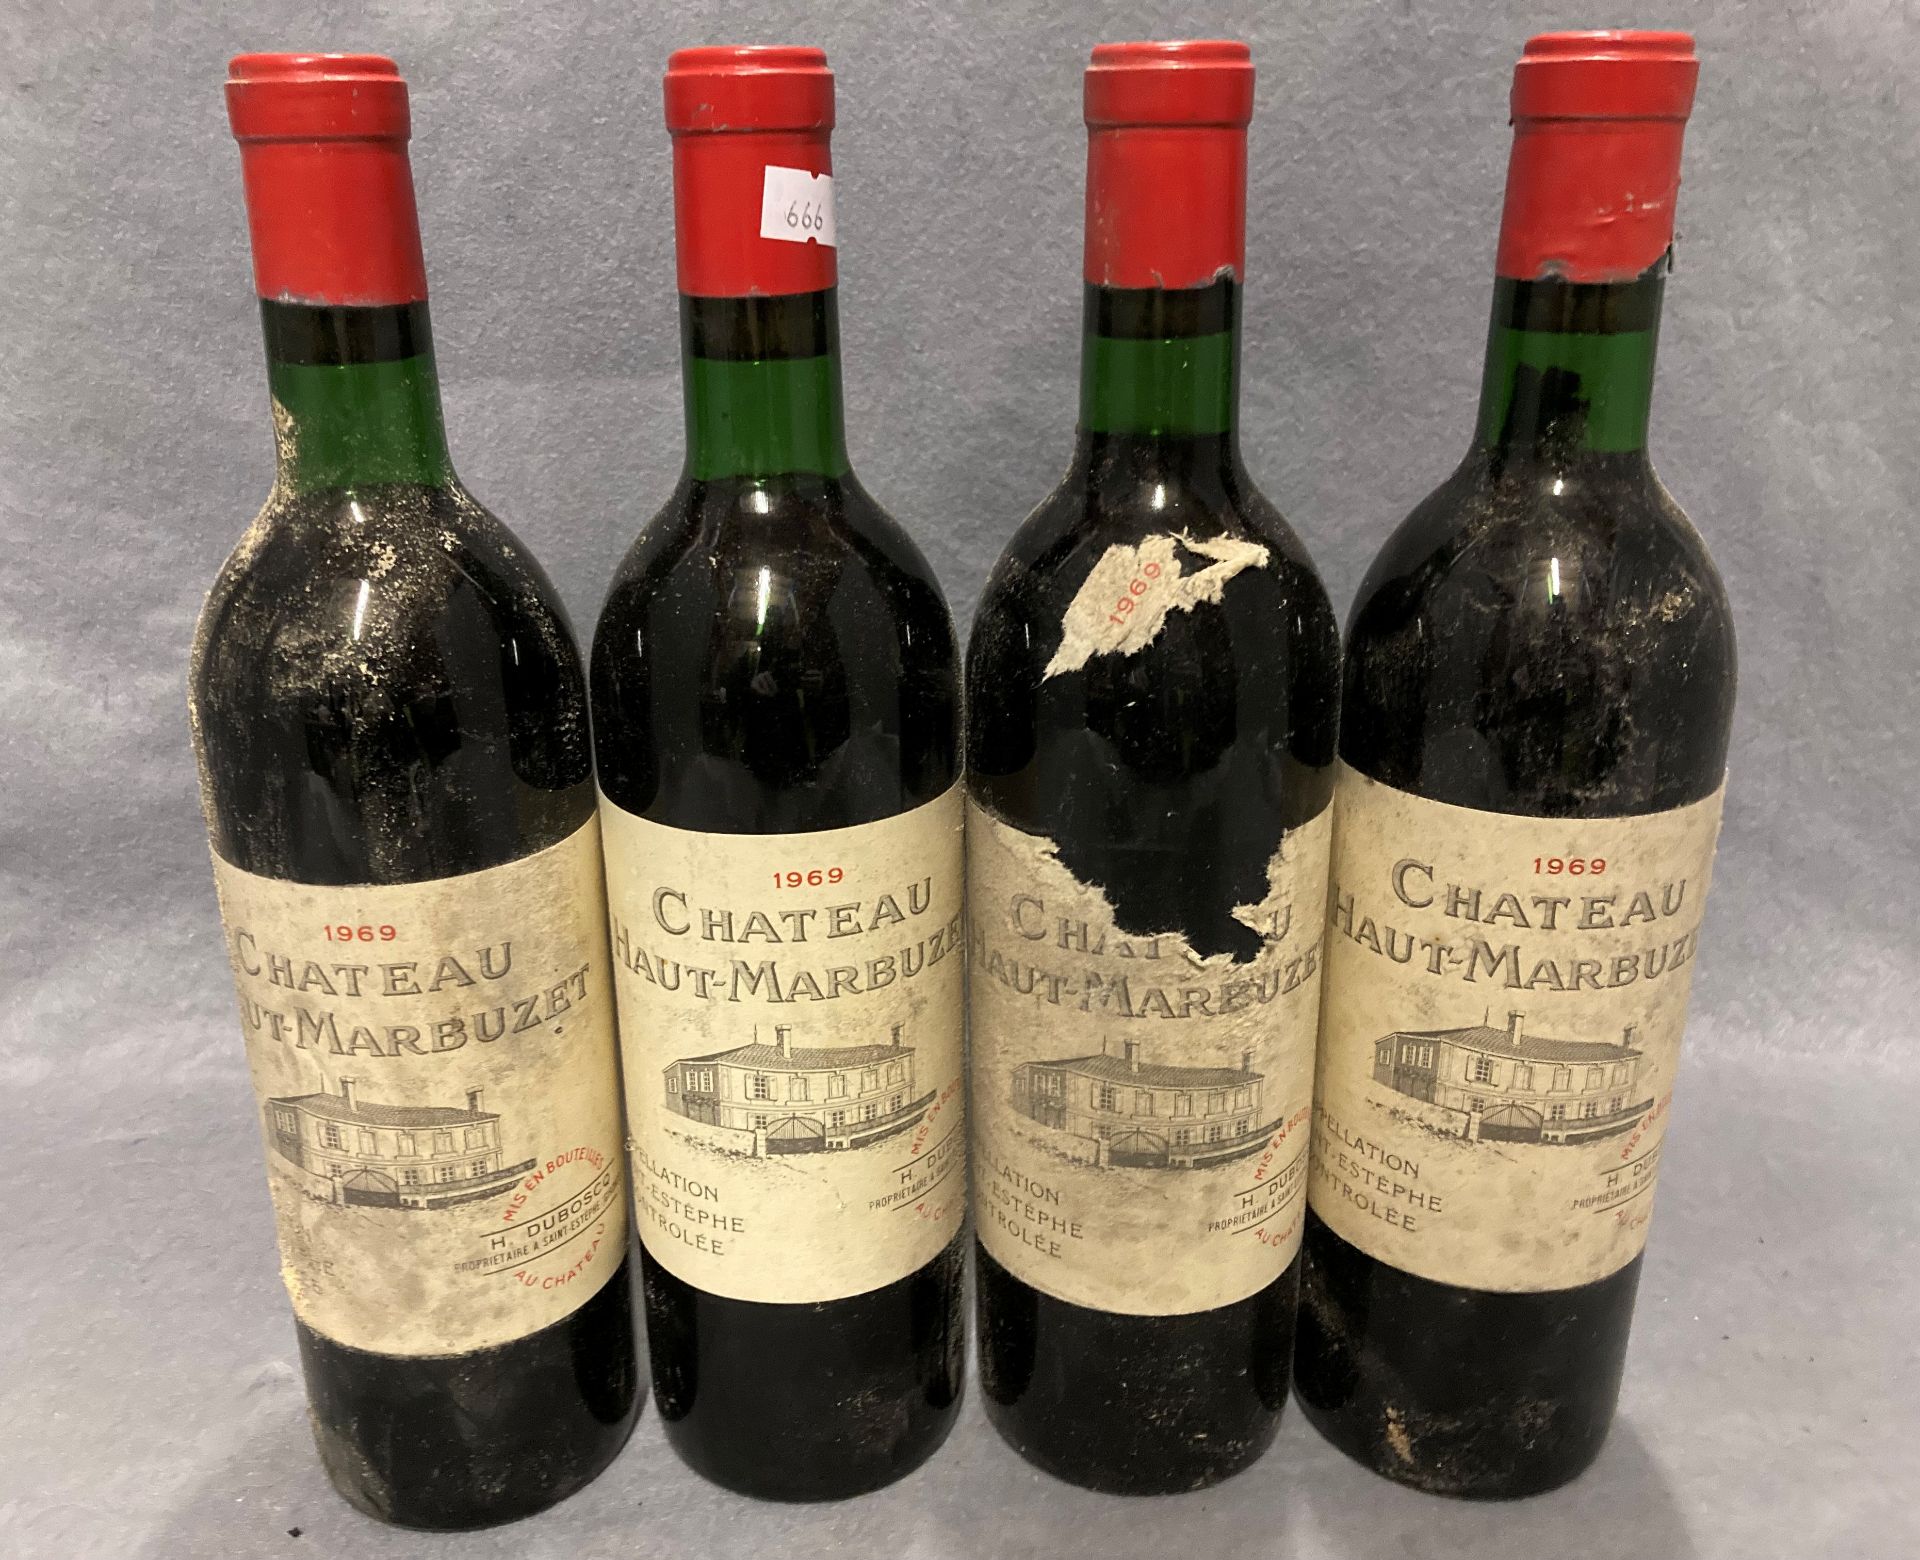 Four 75cl bottles of H Duboscq Chateau Haut-Marbuzet 1969 red wine - advised stored cellared